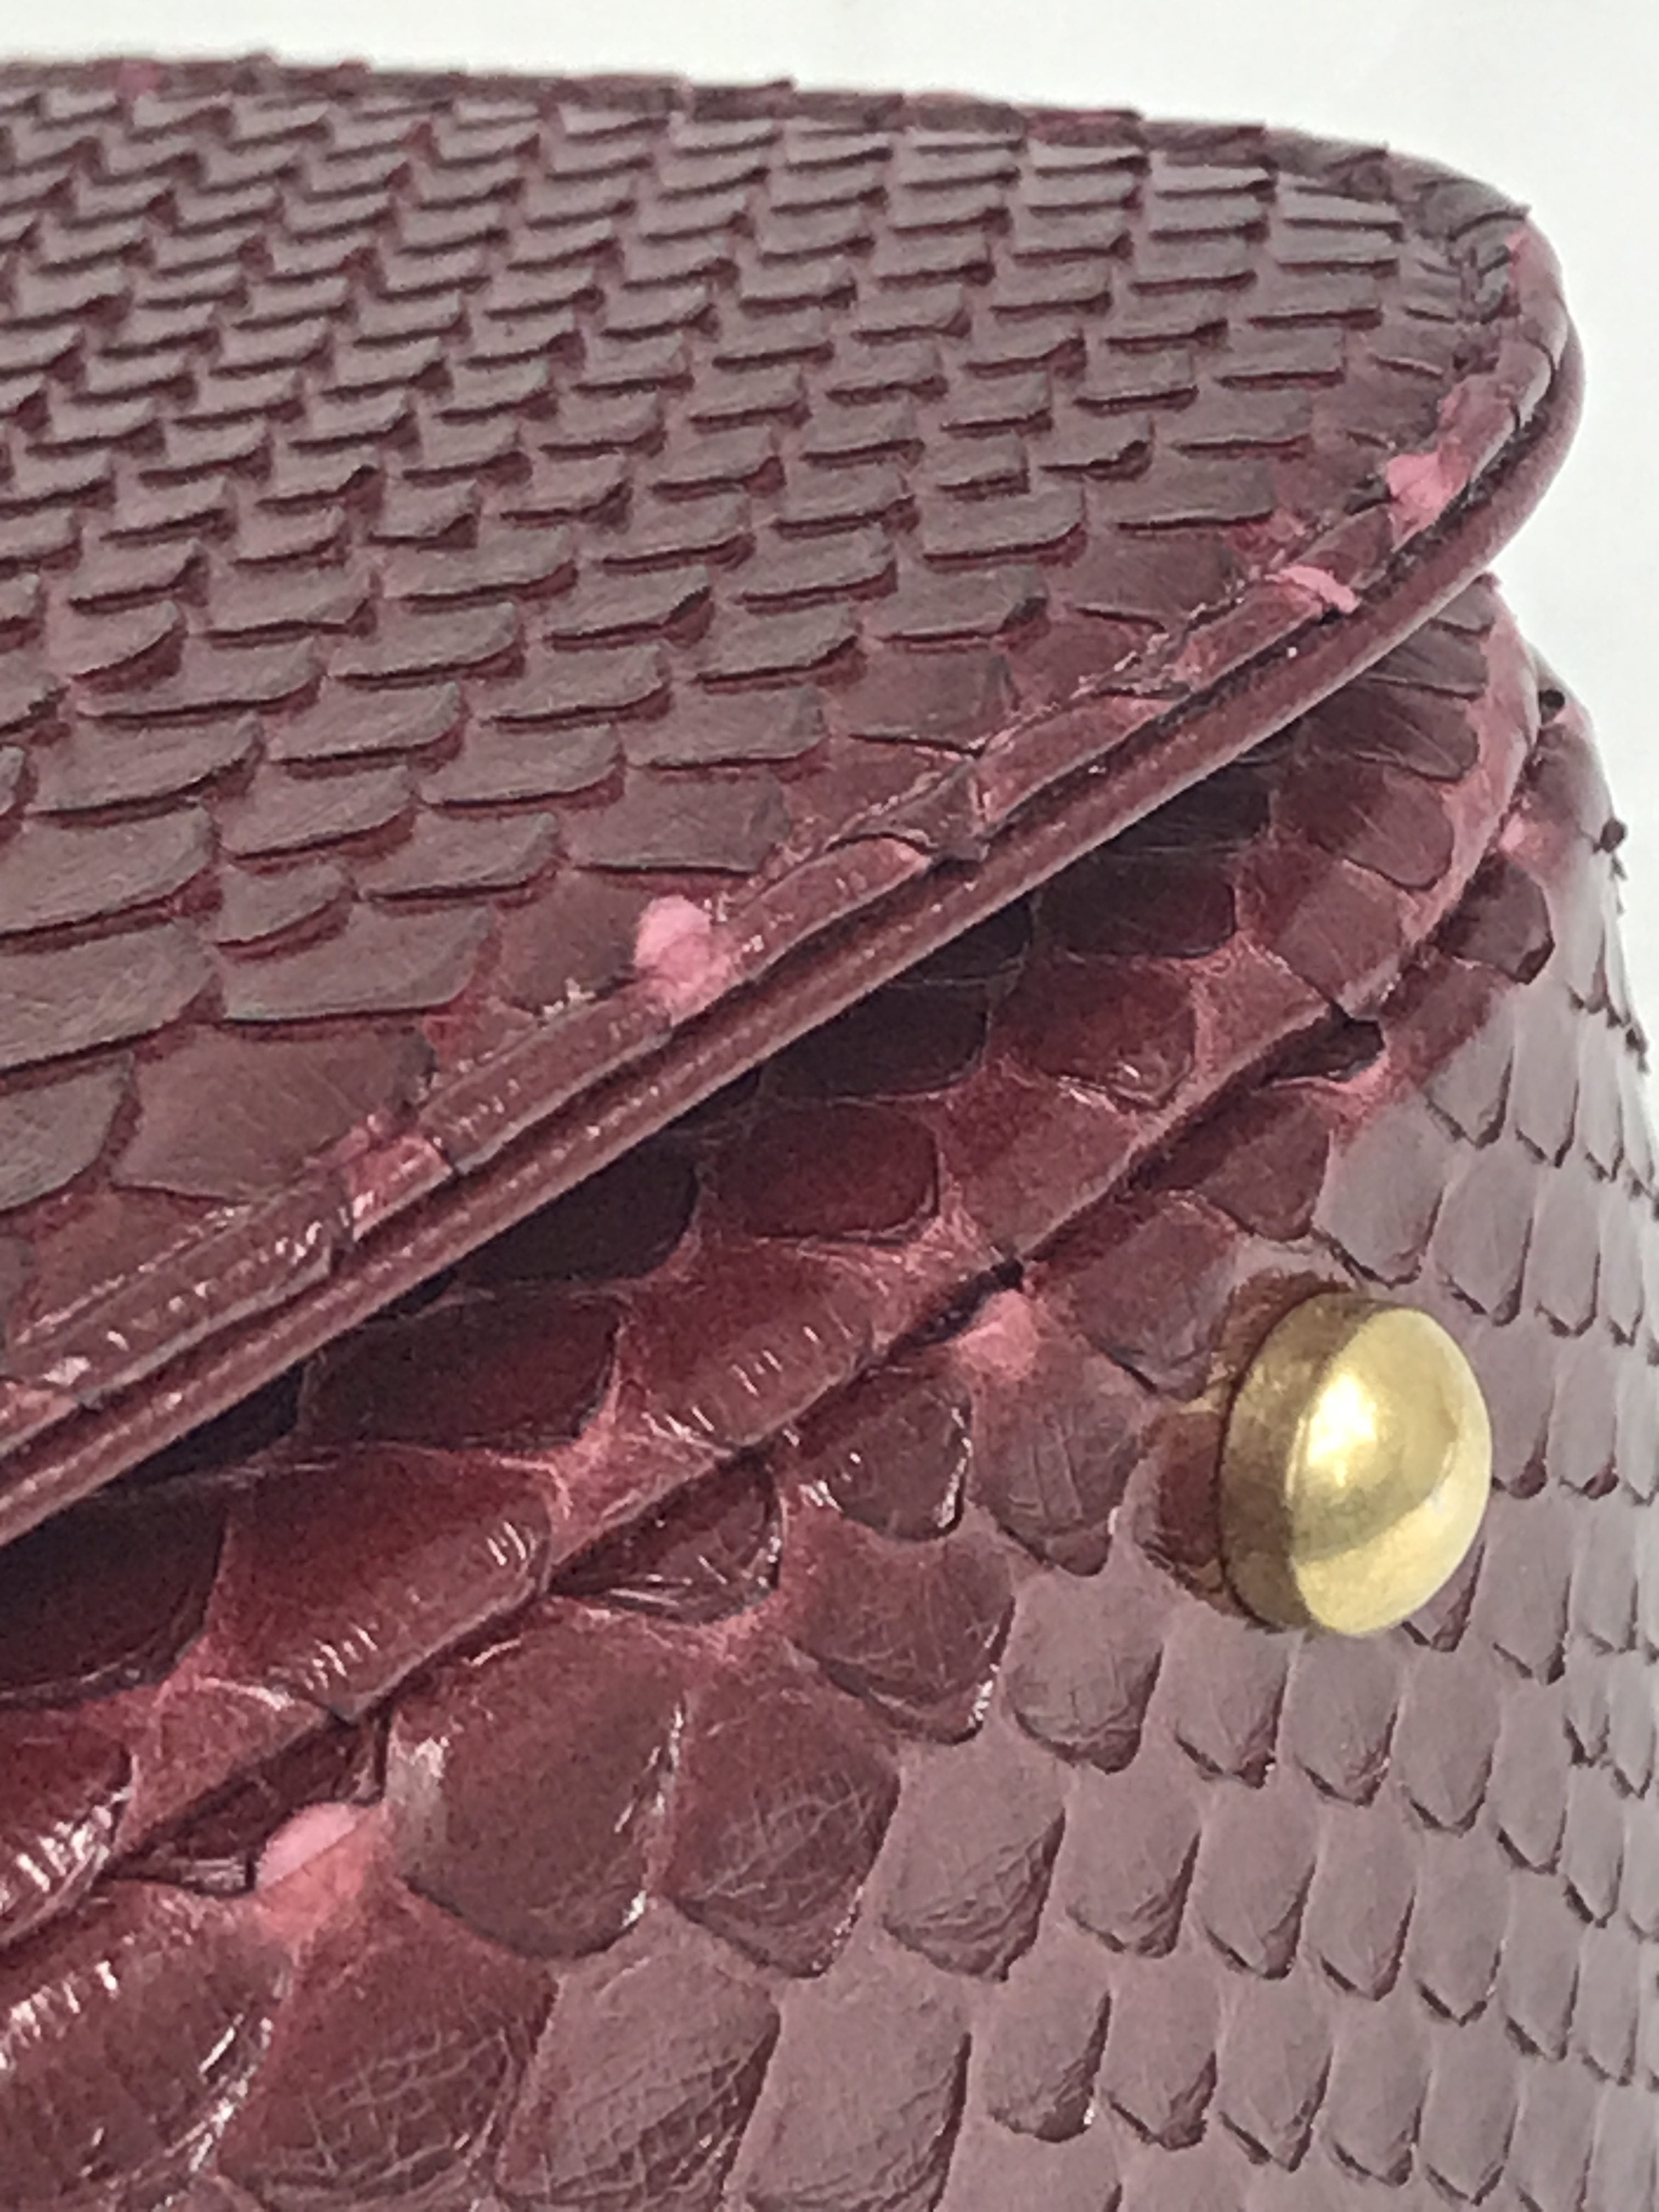 Burgundy Python “Carry Chic” Small Top Handle Flap Bag W/AGHW